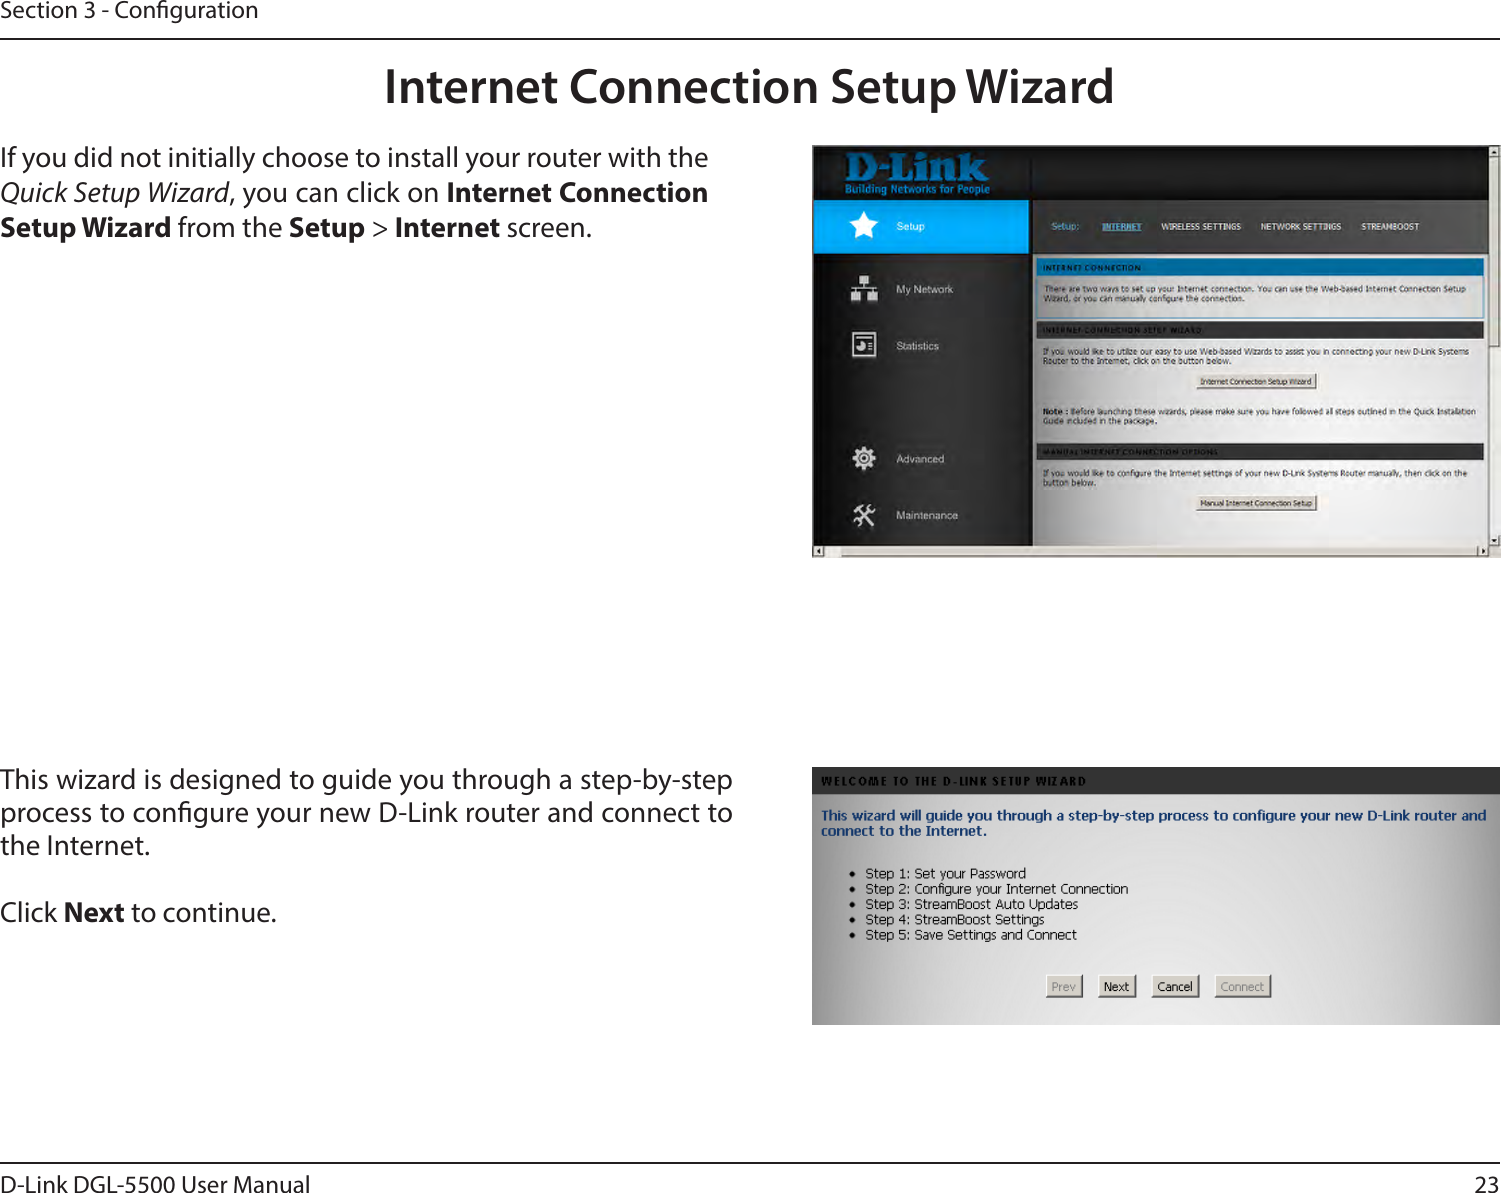 23D-Link DGL-5500 User ManualSection 3 - CongurationInternet Connection Setup WizardIf you did not initially choose to install your router with the Quick Setup Wizard, you can click on Internet Connection Setup Wizard from the Setup &gt; Internet screen.This wizard is designed to guide you through a step-by-step process to congure your new D-Link router and connect to the Internet.Click Next to continue. 